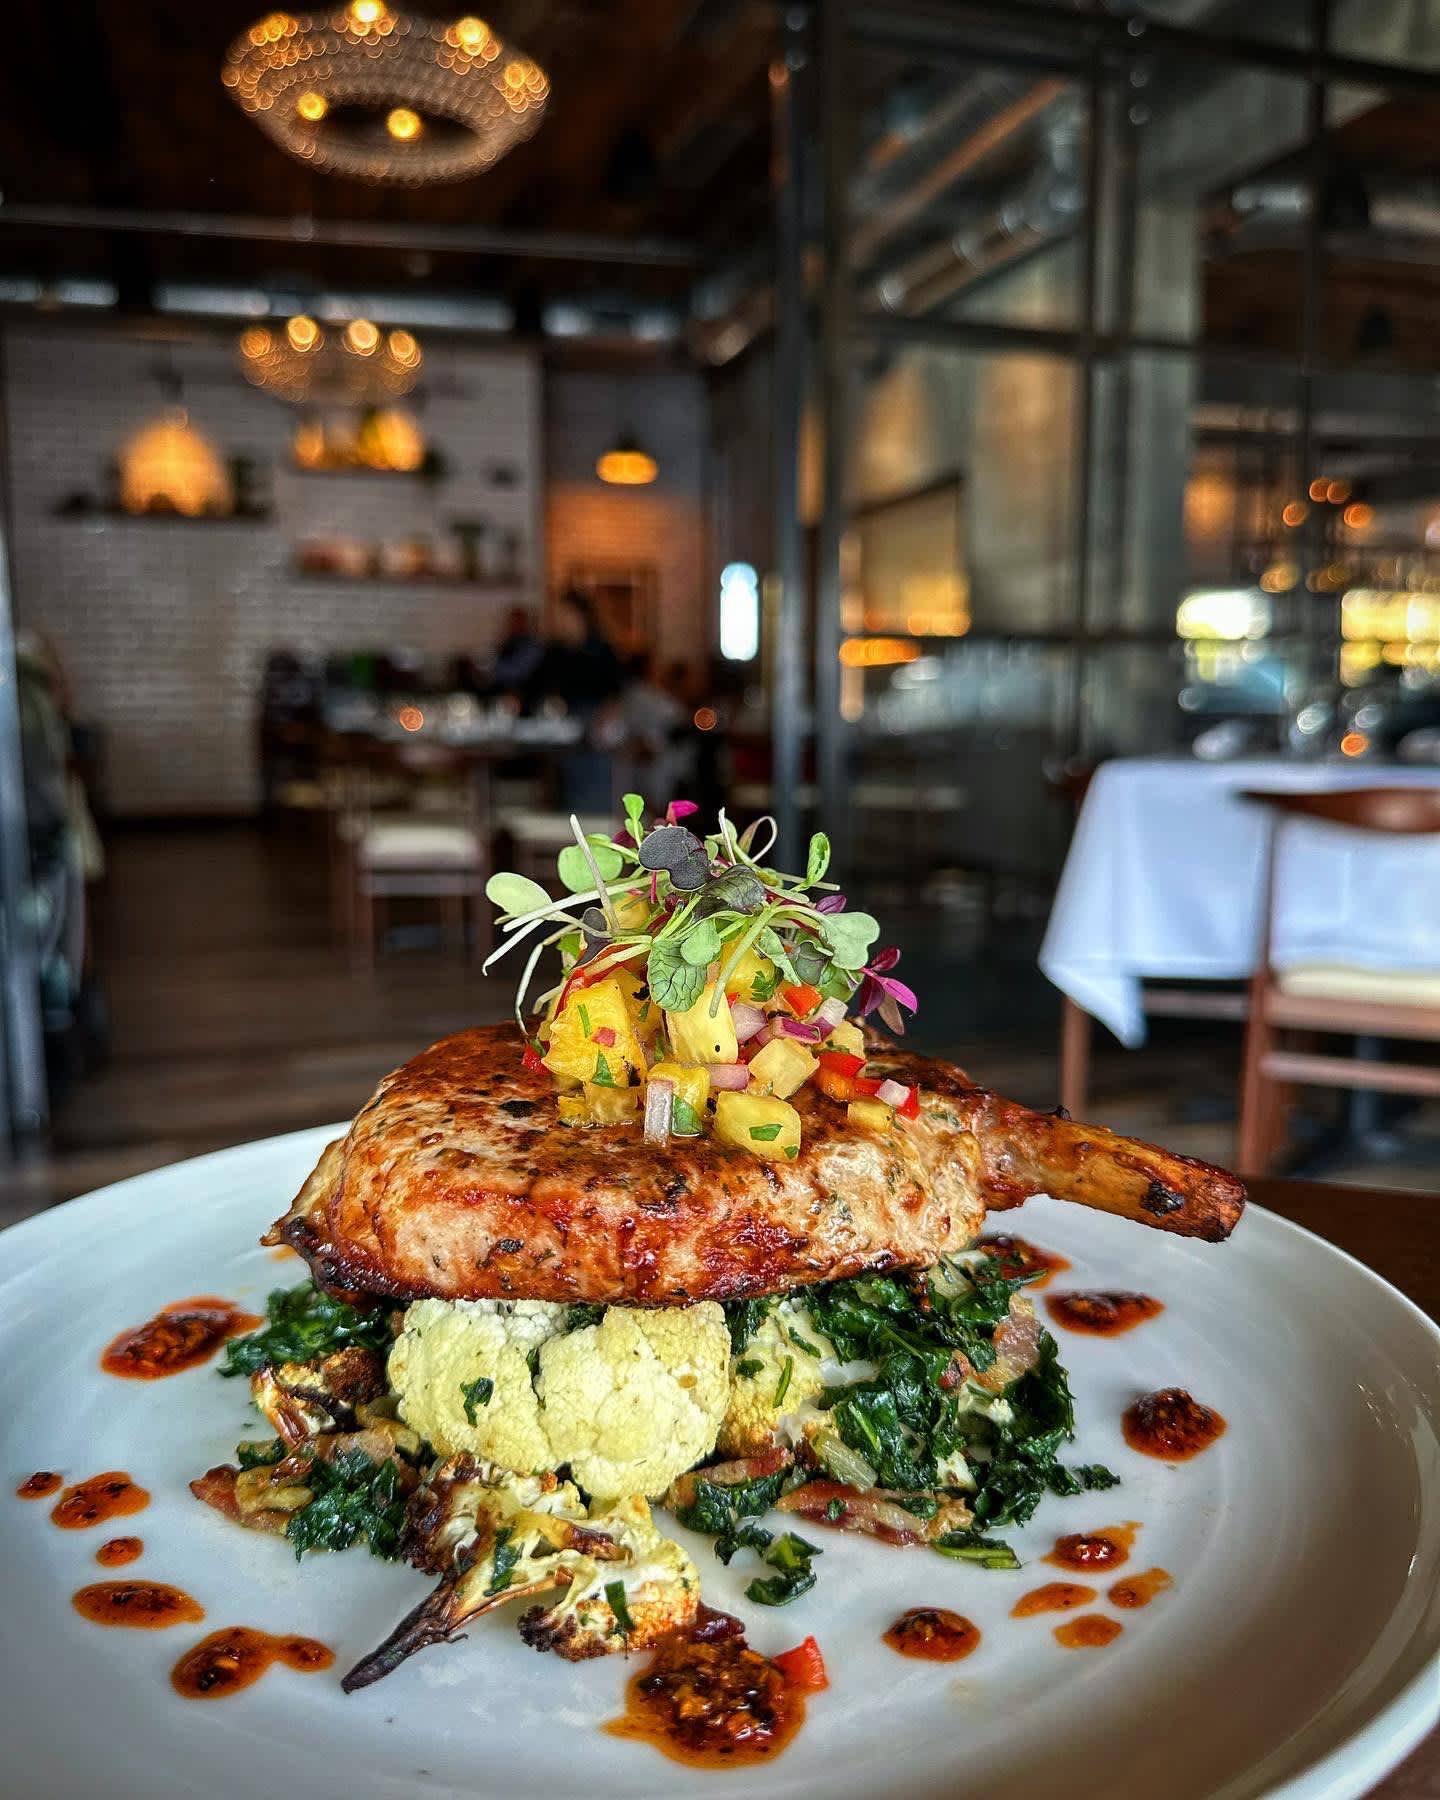 Spring Menus Are Here!

FEATURING 
Pork Chop "A La Plancha"
Served With Roasted Cauliflower, Bacon Braised Kale, 
Charred Pineapple Salsa, Chili Crunch